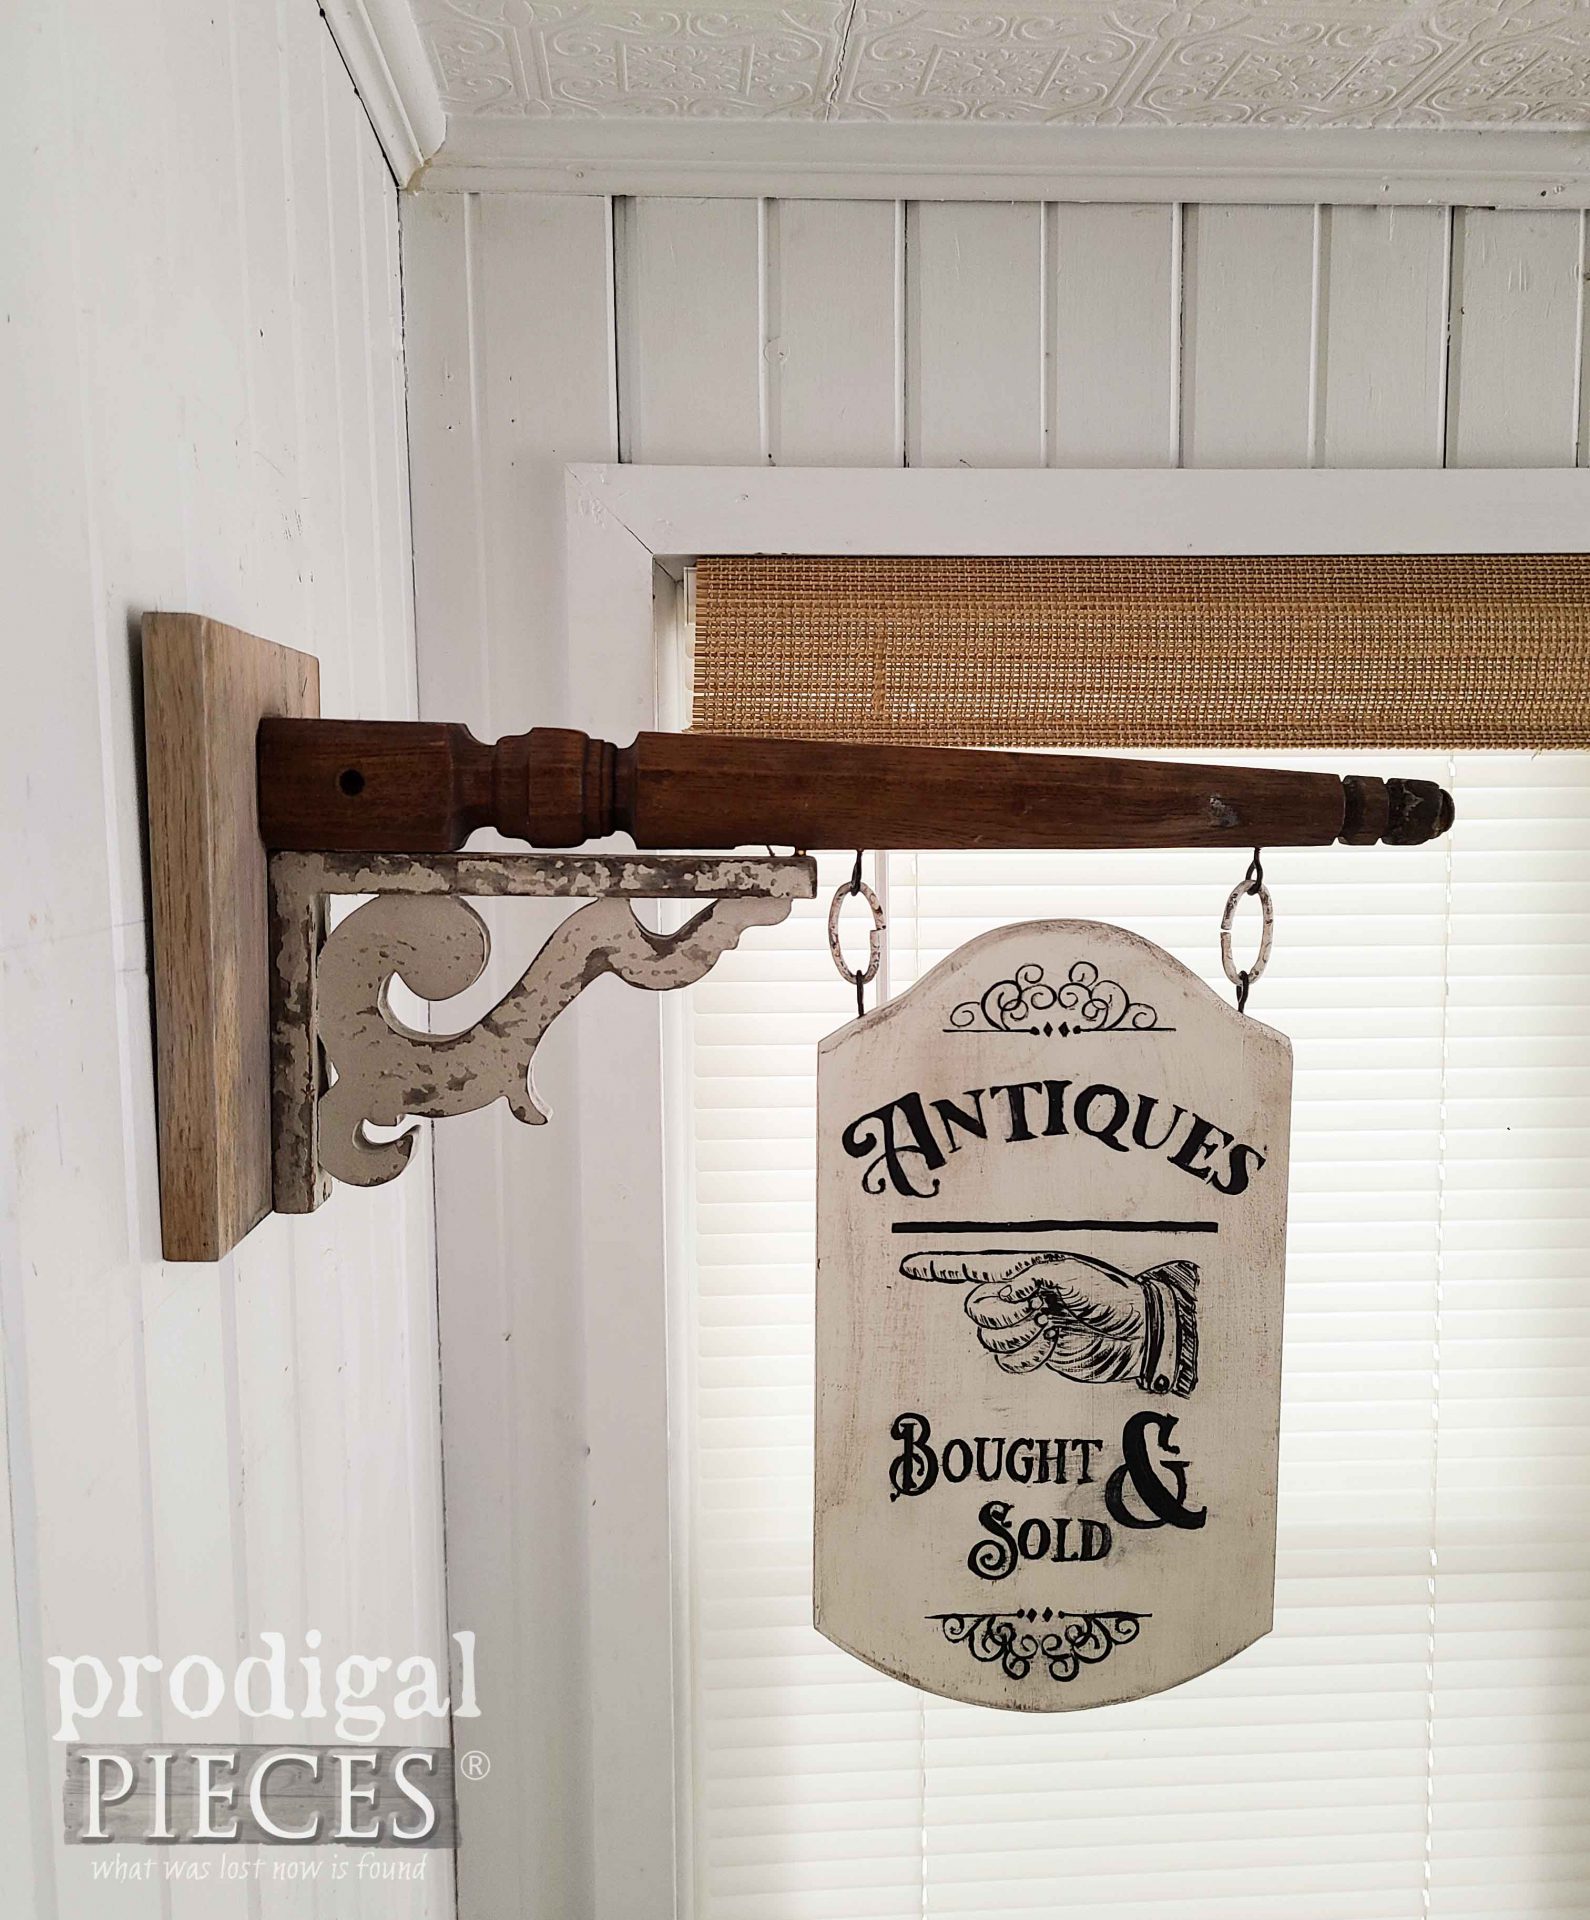 Handmade Bought & Sold Sign from Upcycled Chair legs by Larissa of Prodigal Pieces | prodigalpieces.com #prodigalpieces #handmade #diy #home #homedecor